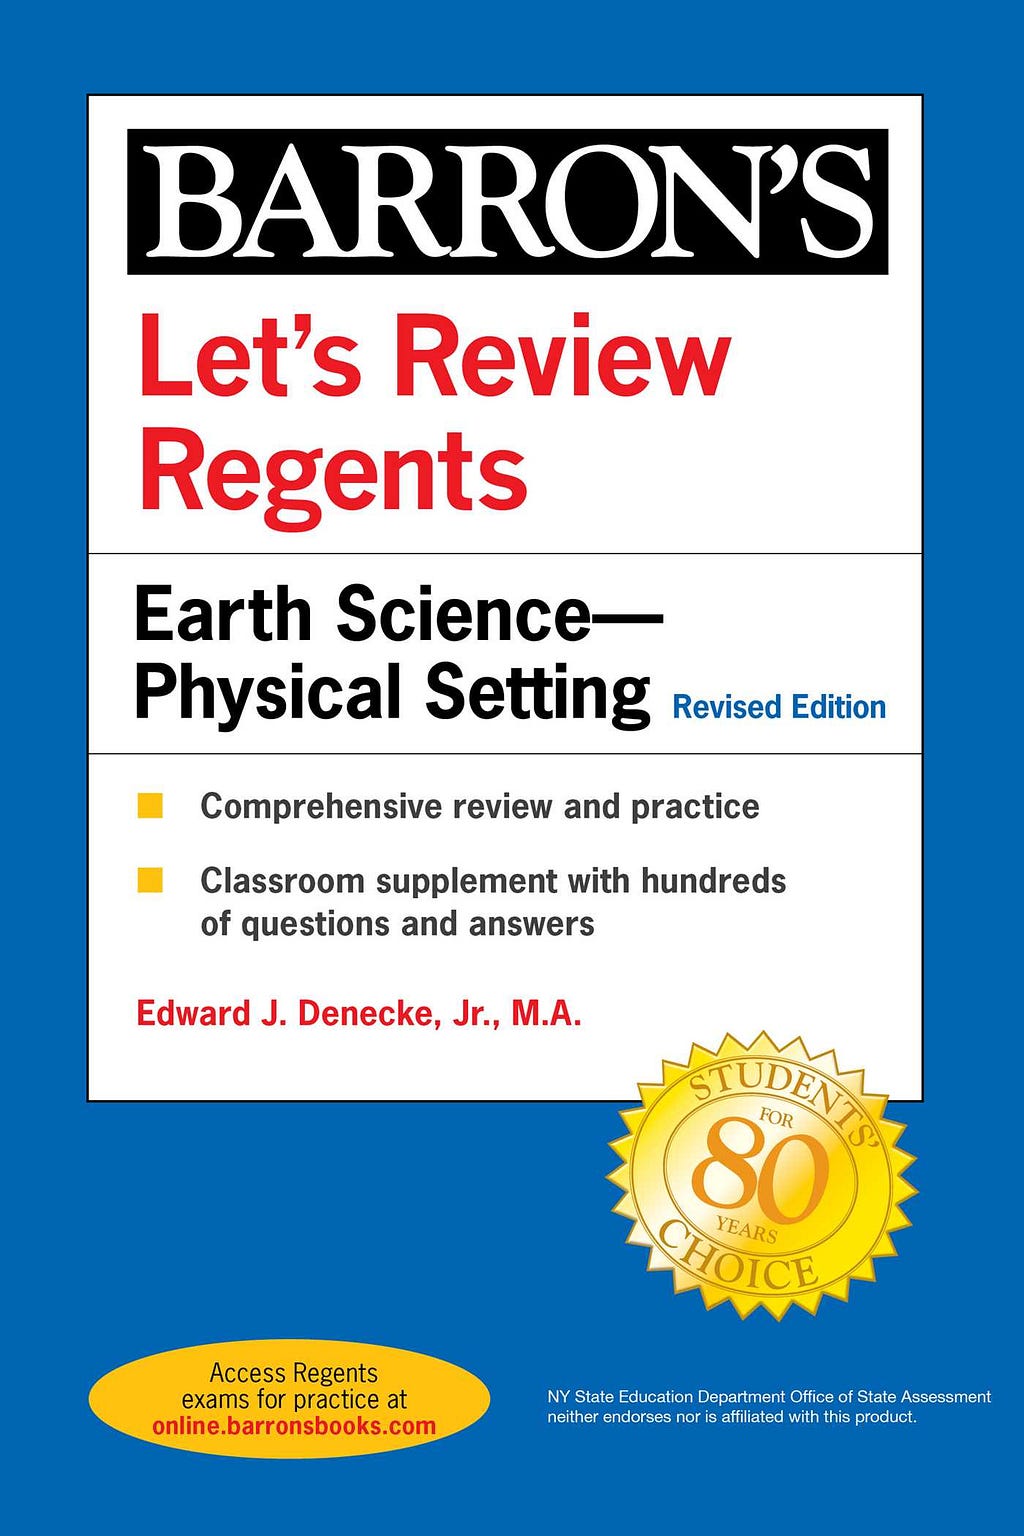 Let's Review Regents: Earth Science--Physical Setting Revised Edition (Barron's Regents NY) PDF